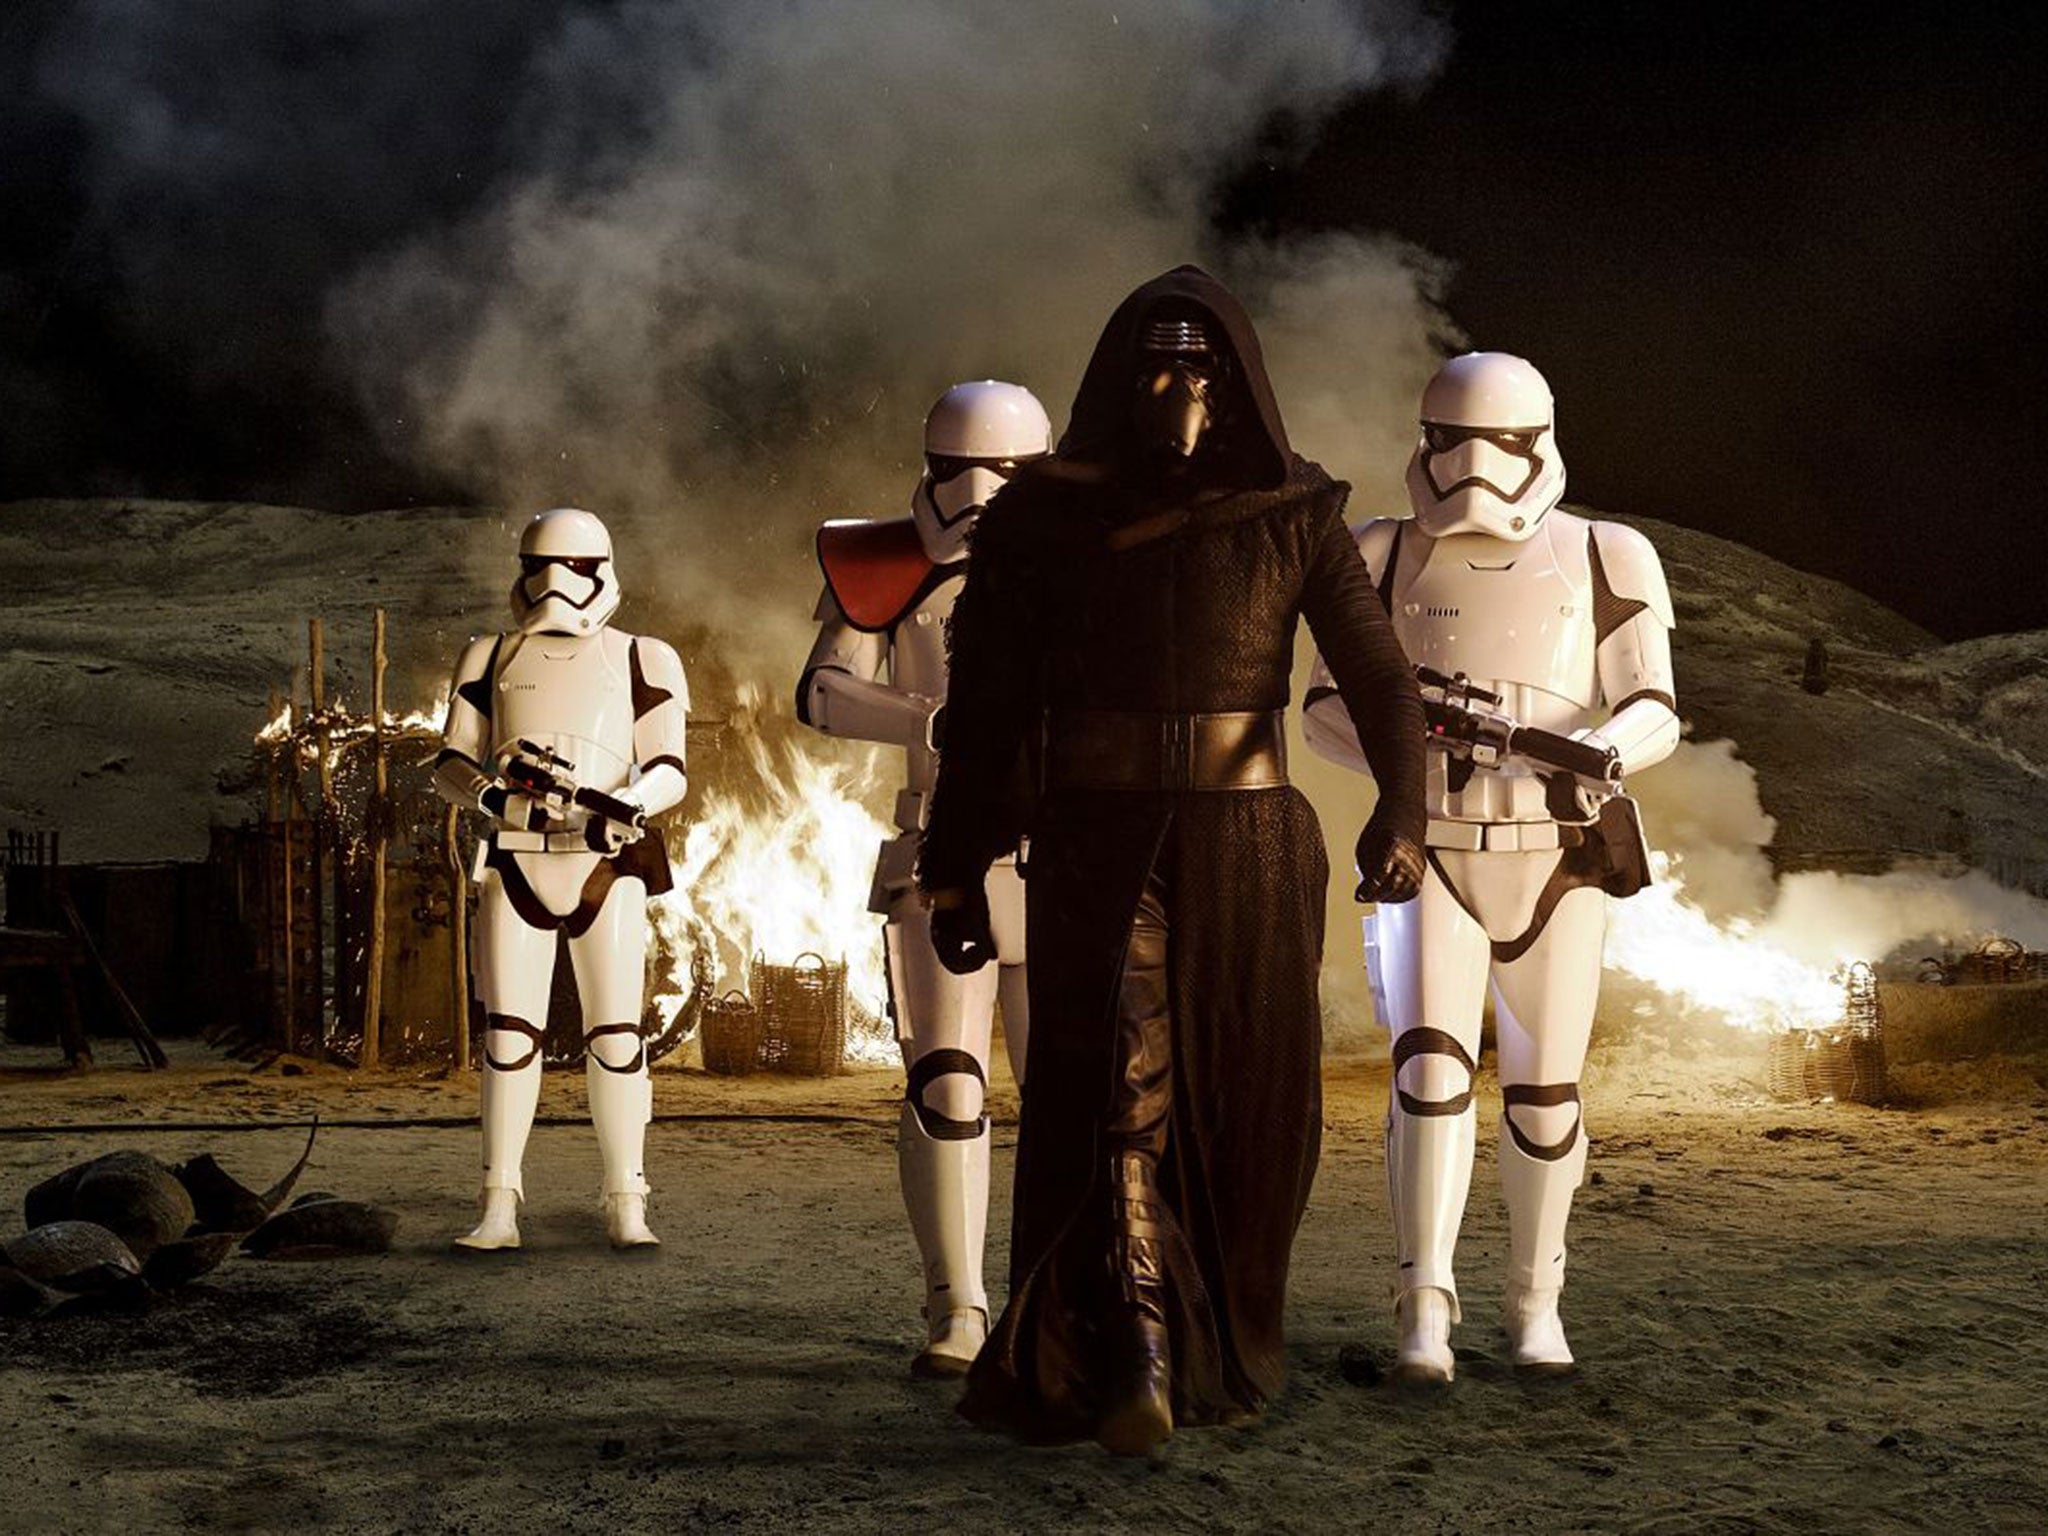 JJ Abrams suffered problems with drones leaking set photos while filming The Force Awakens